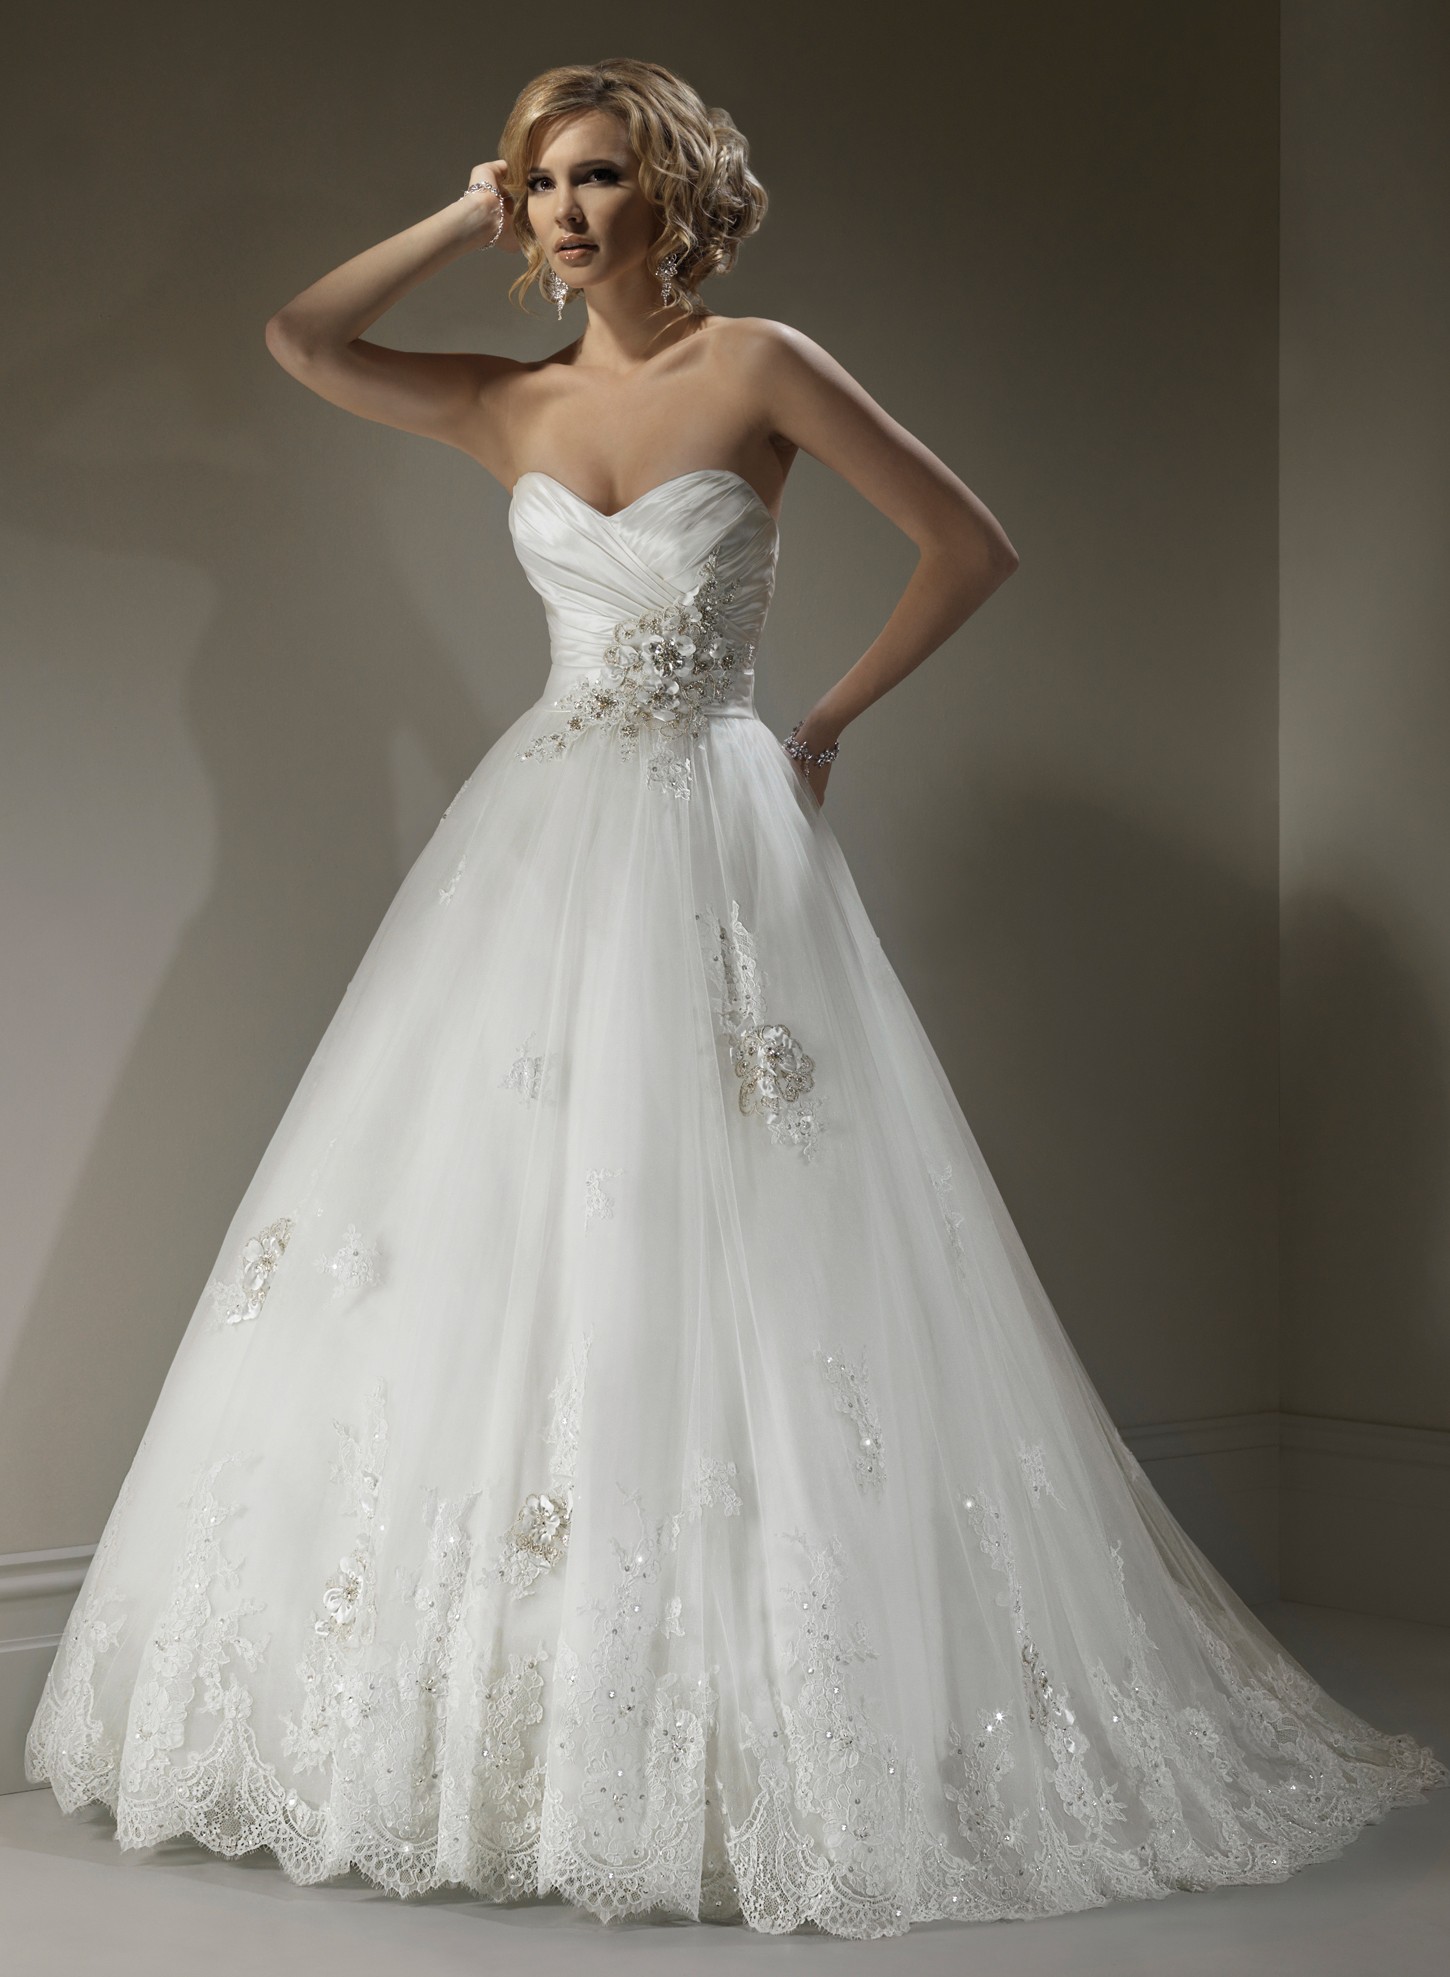 21 Gorgeous A-Line Wedding Dresses Ideas - The WoW Style